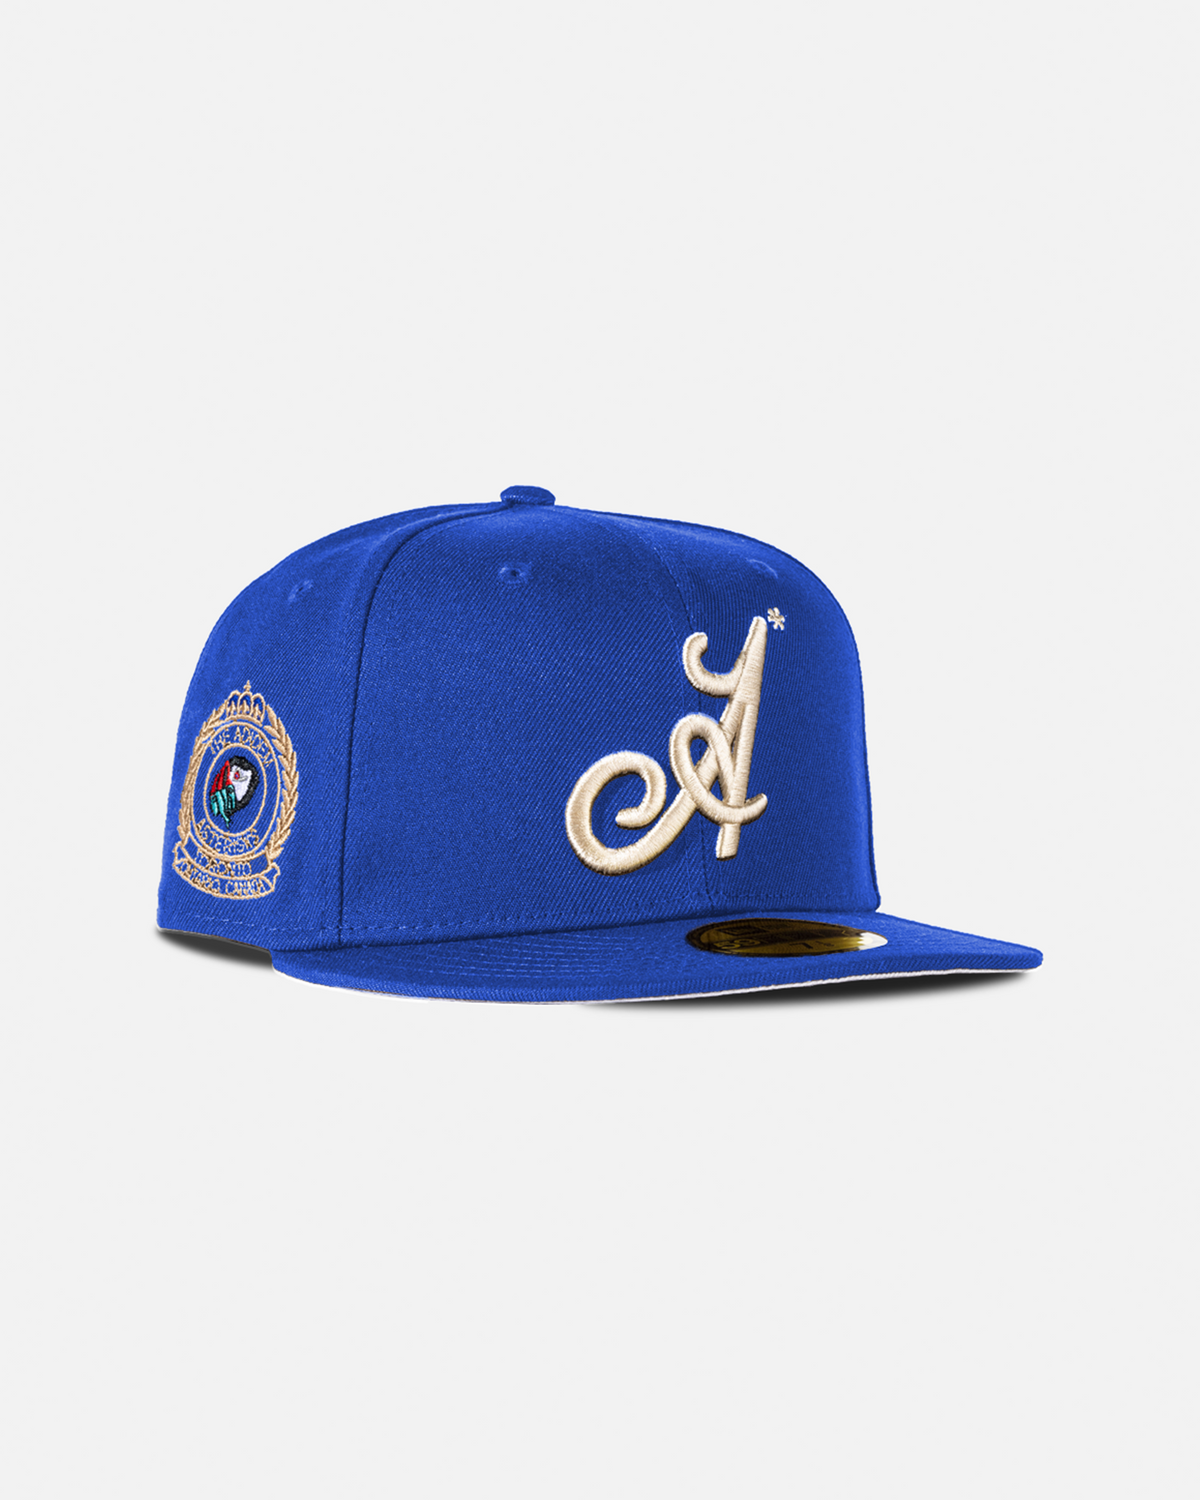 New Era Fitted - Light Royal (Series B)